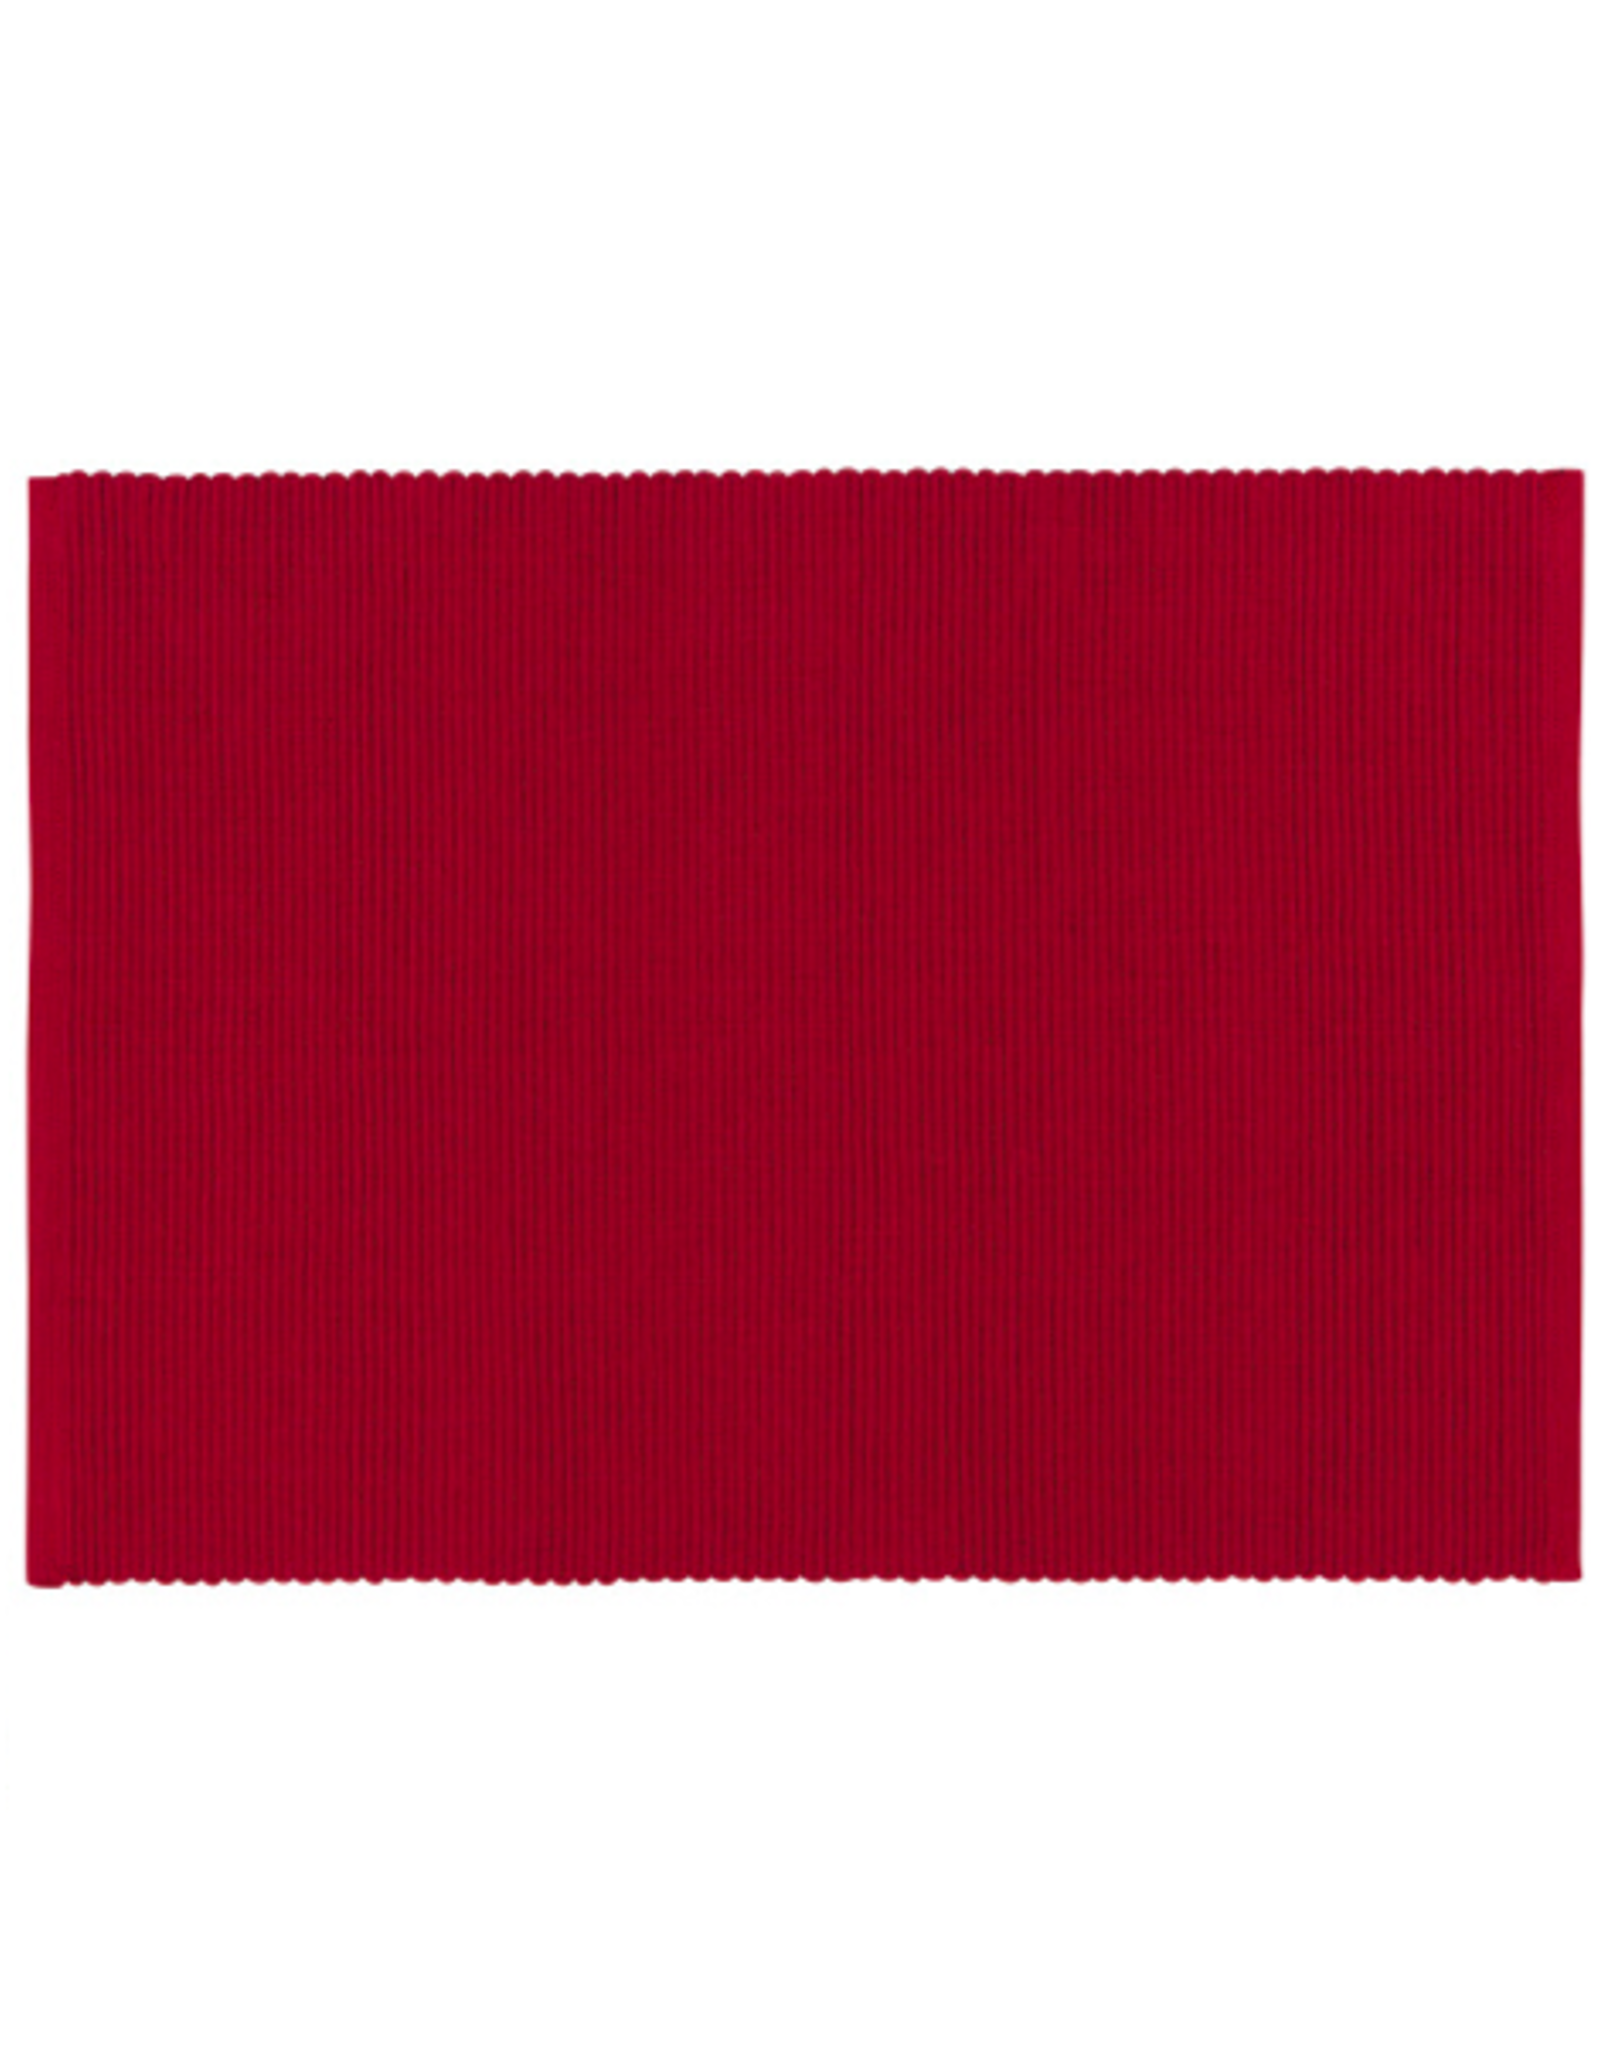 DCA - Placemat / Ribbed, Scarlet